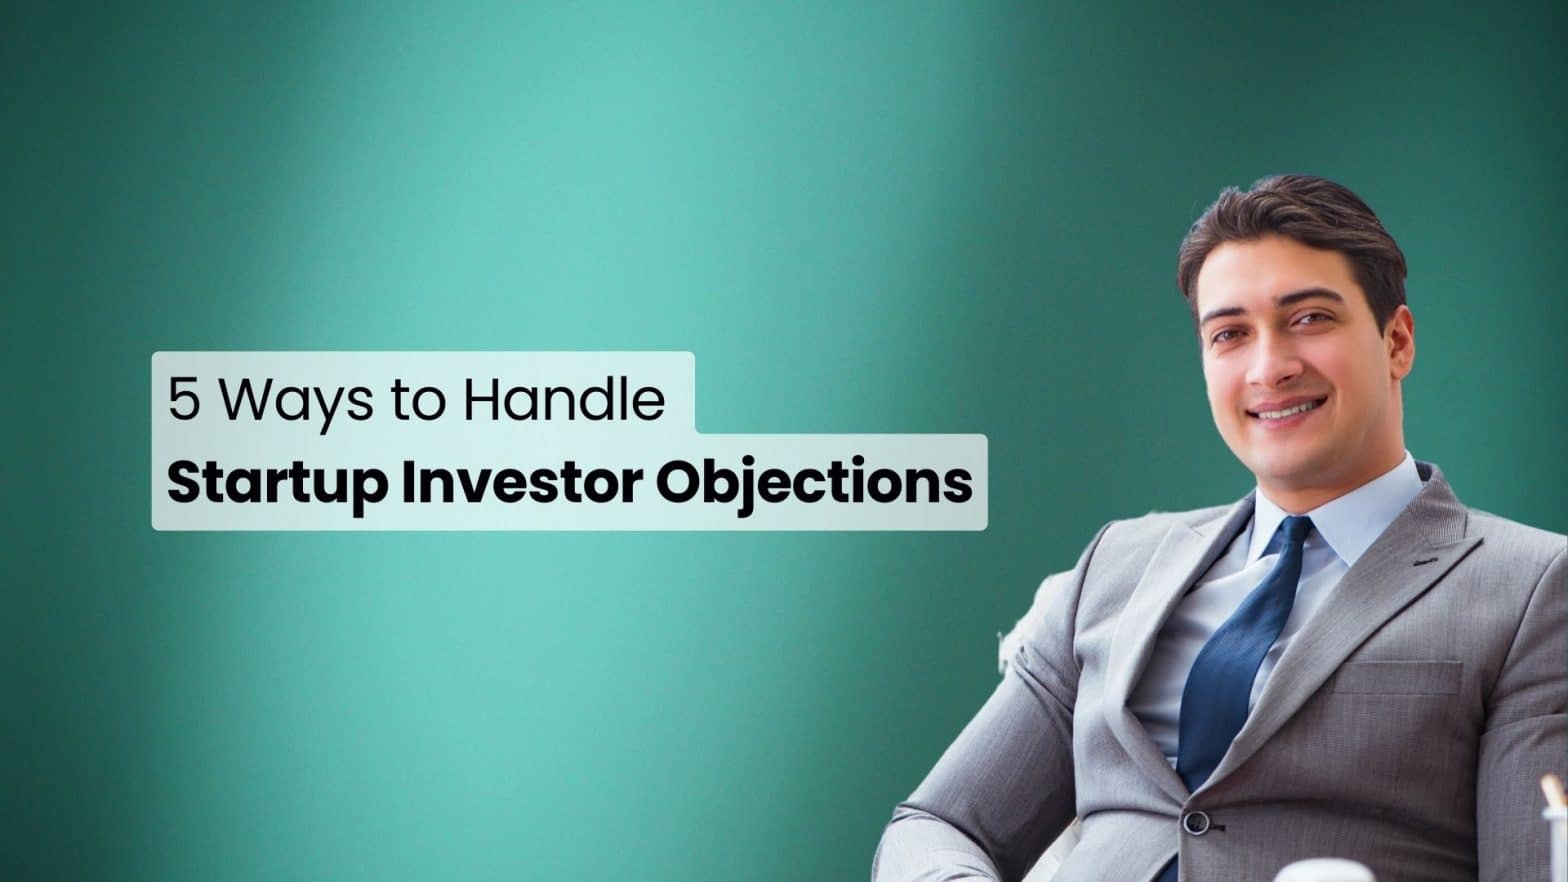 5 Ways to Handle Startup Investor Objections